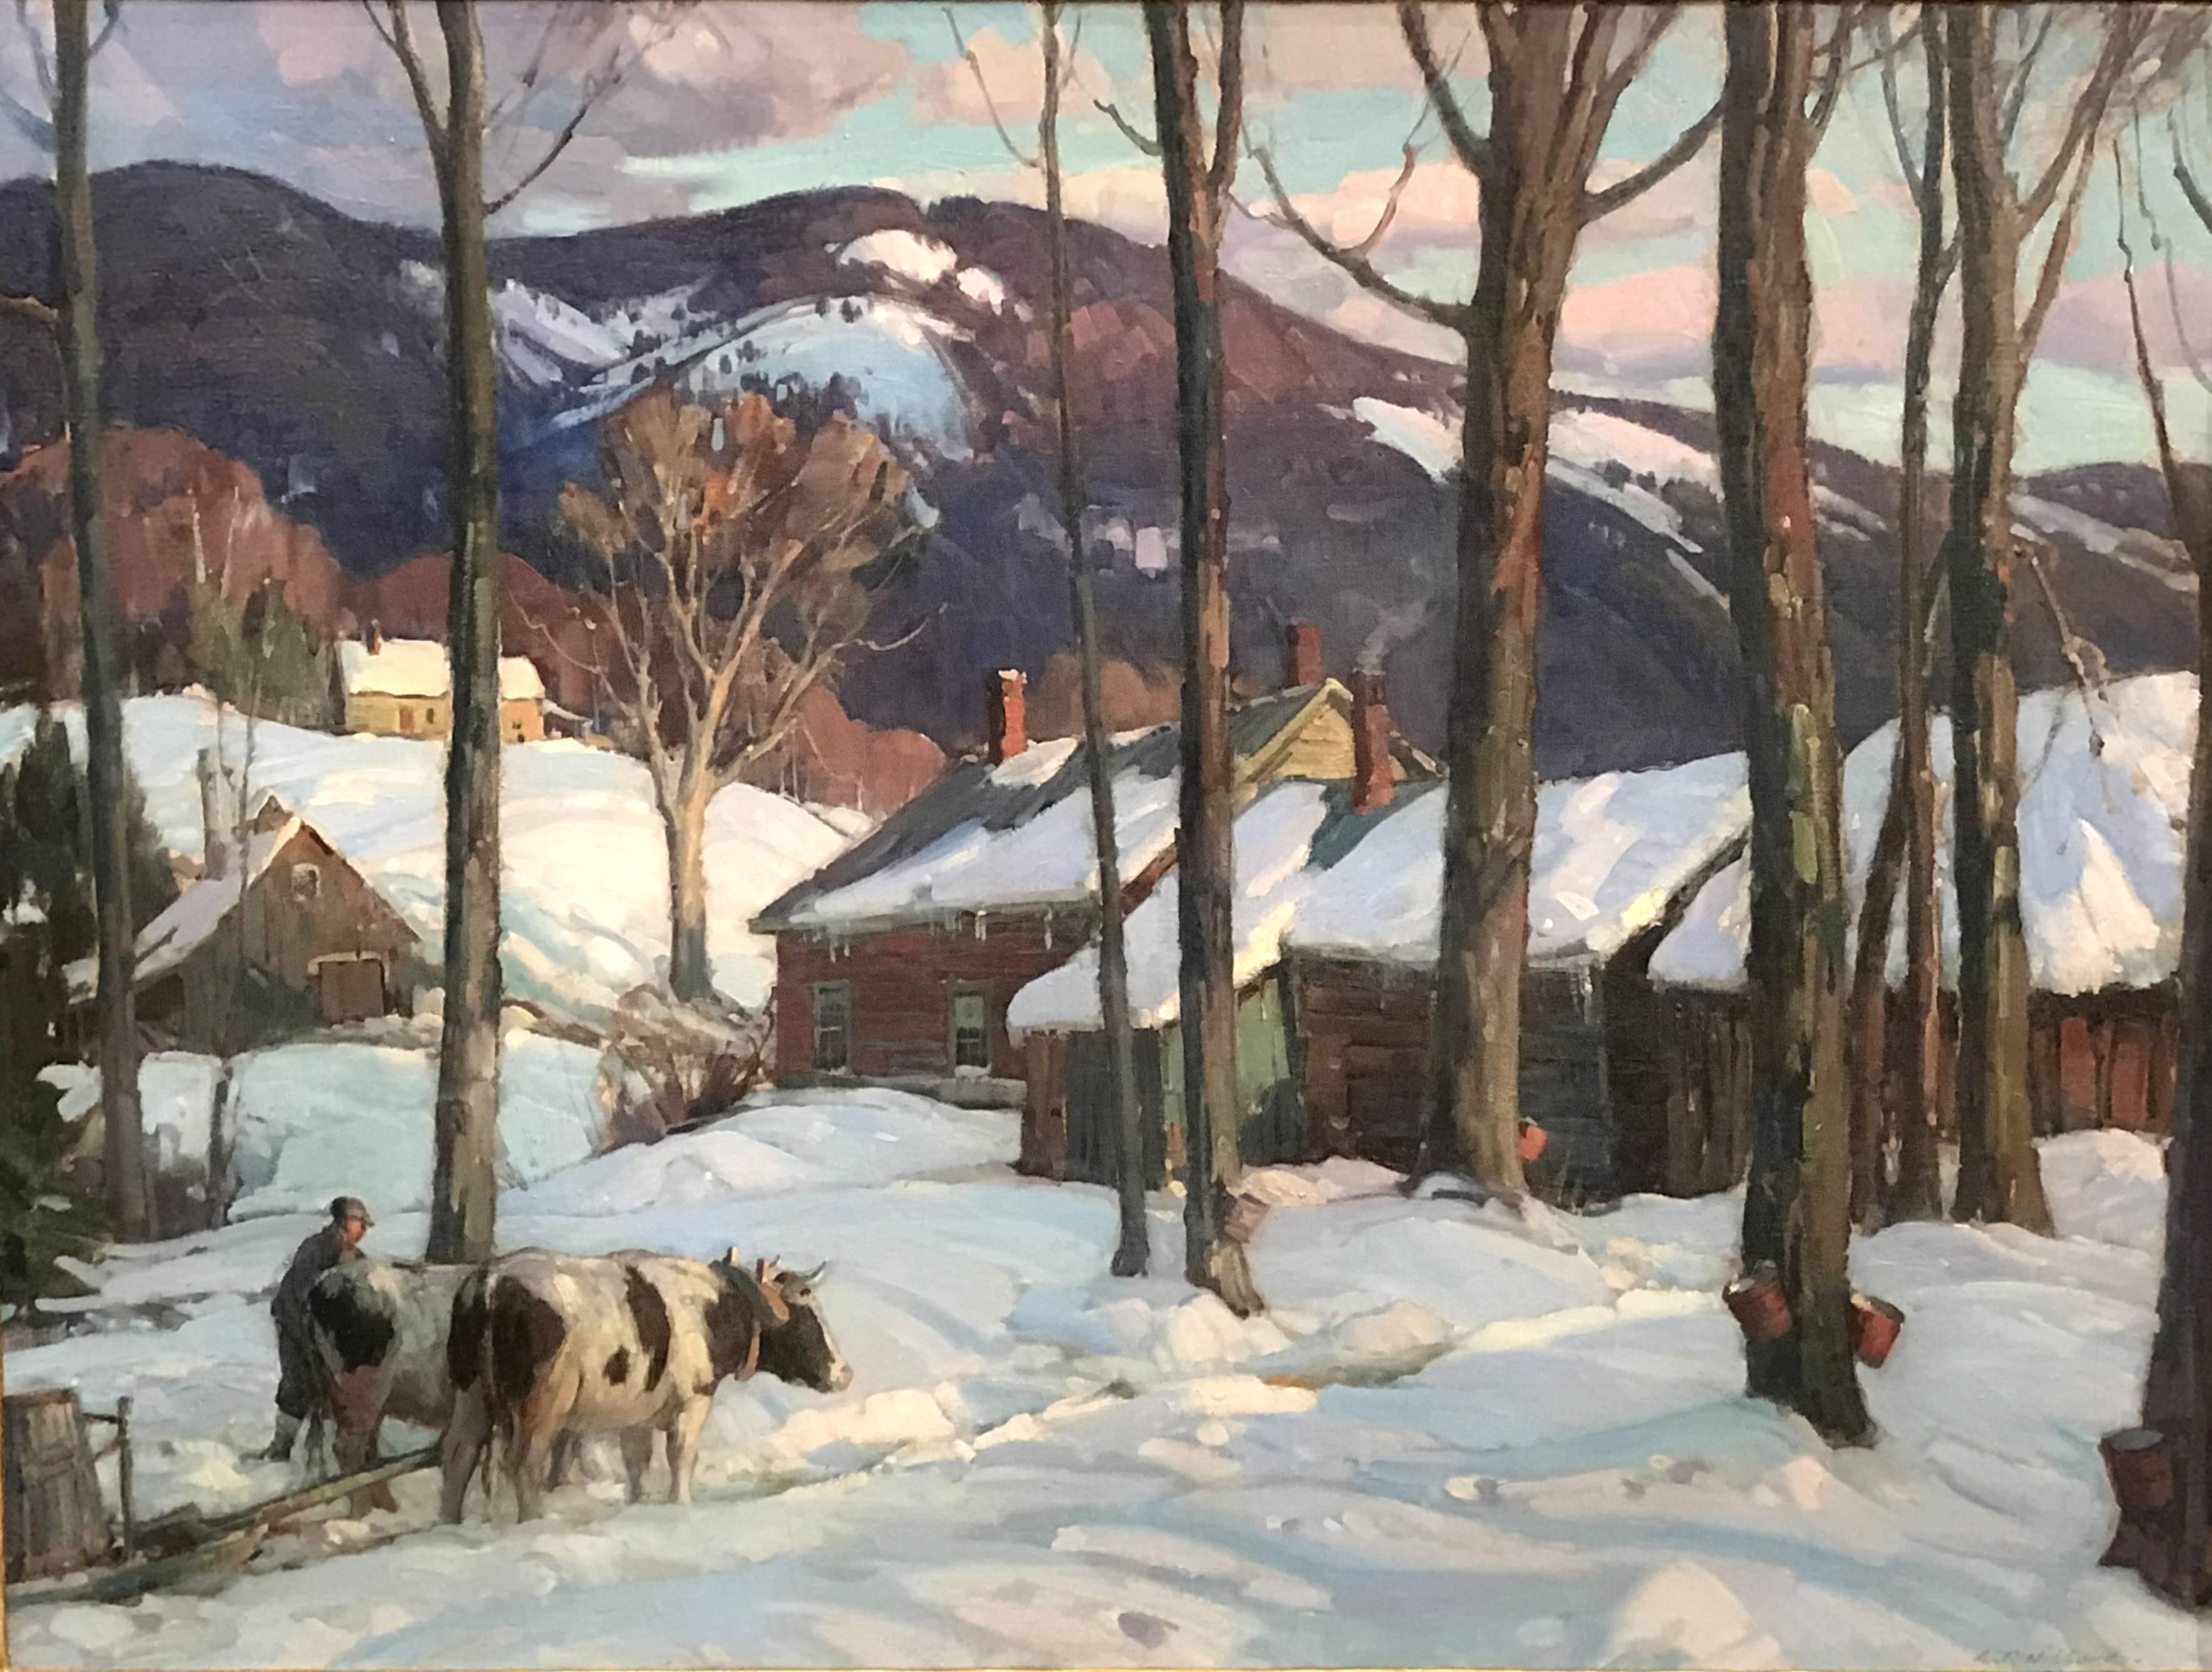 Sugaring Time - Painting by Aldro Thompson Hibbard